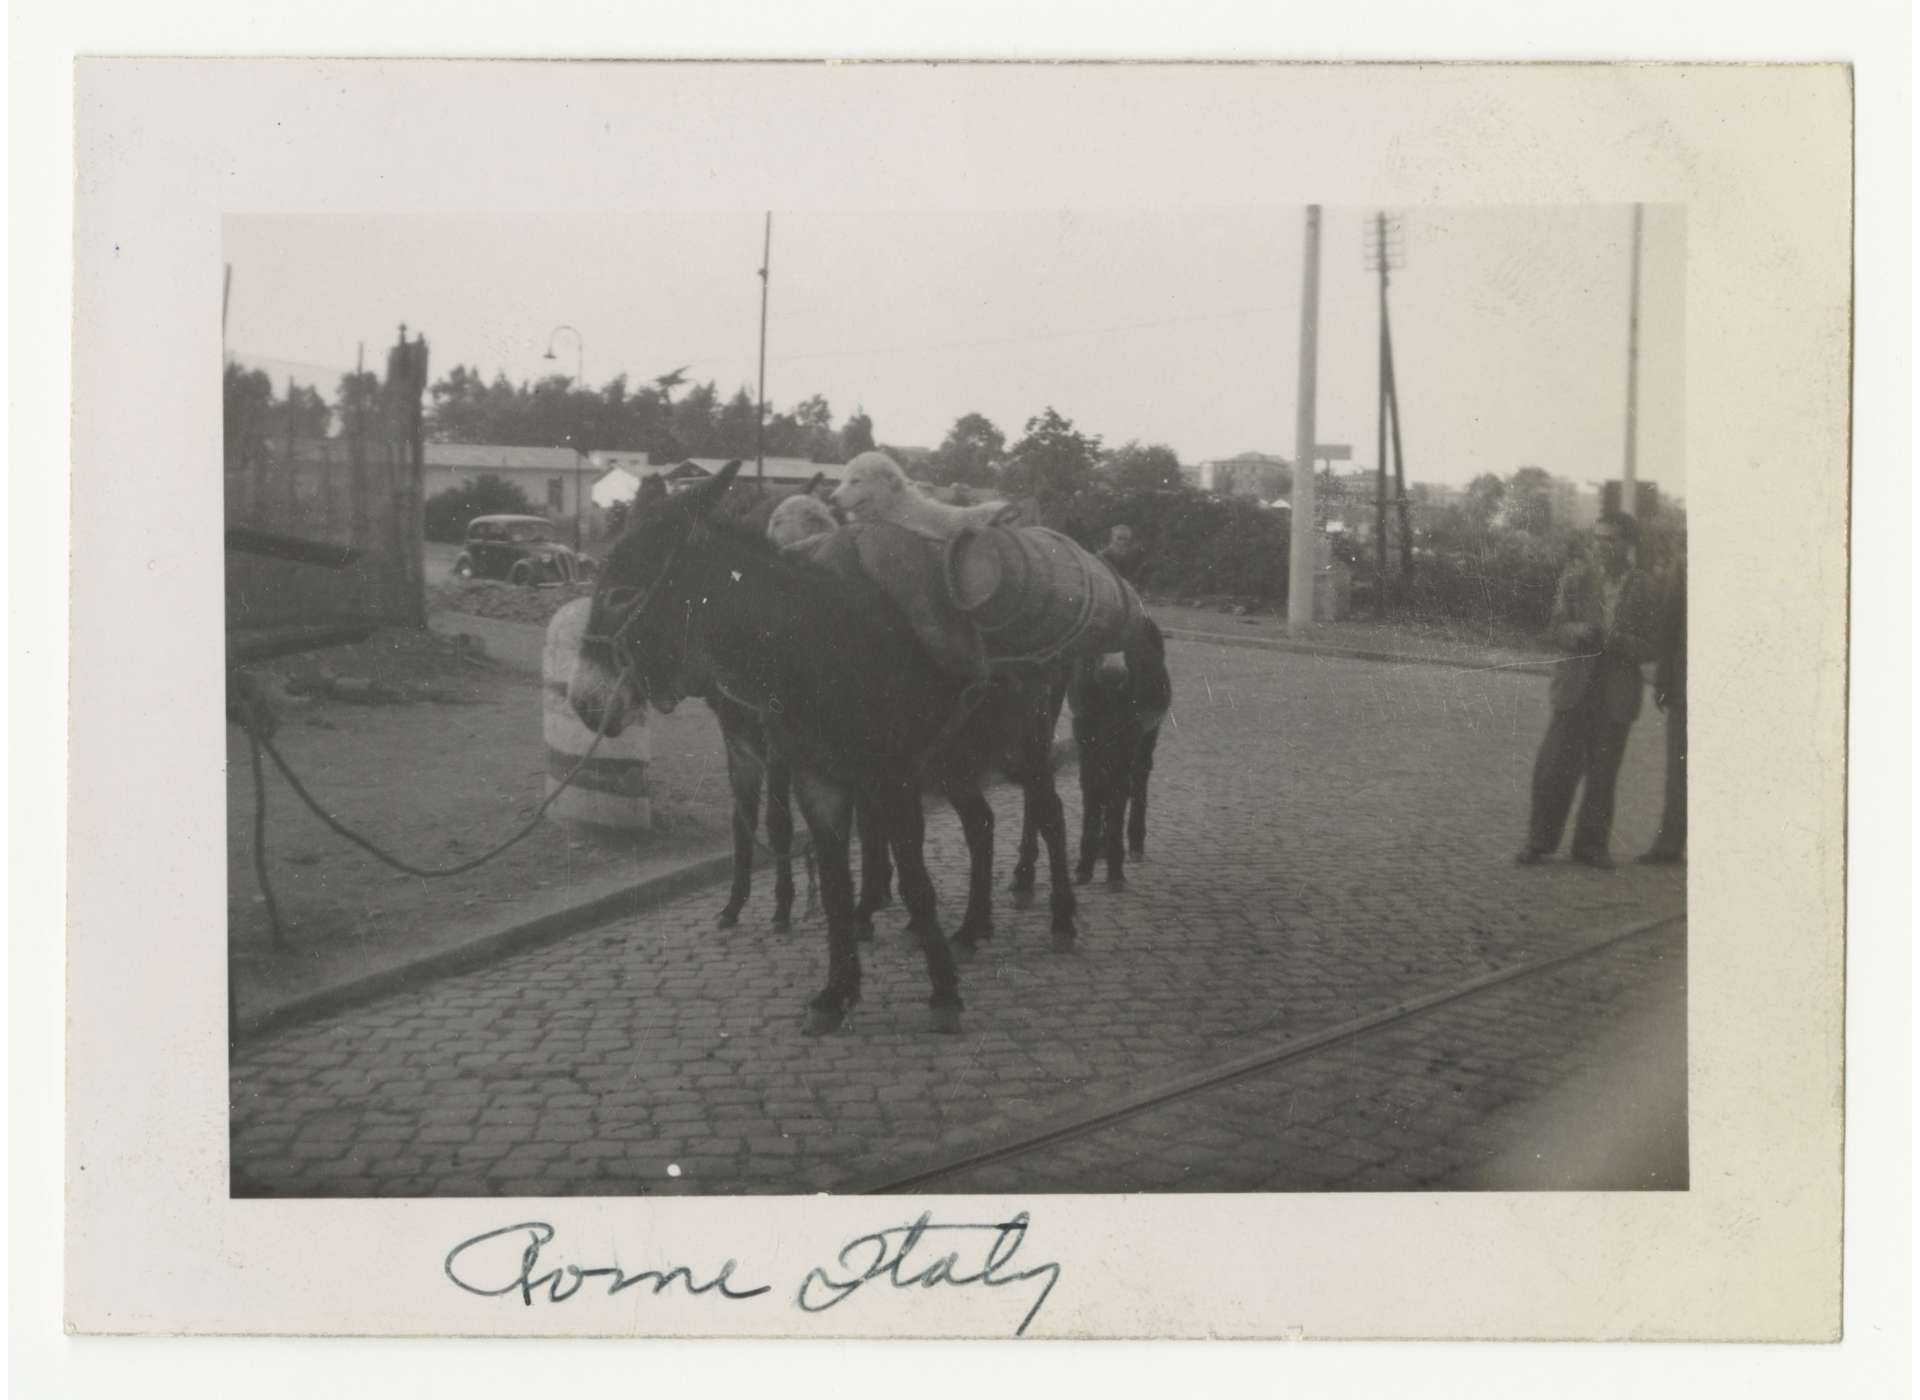 Dog riding a pack mule in Rome, 1944-45. Pack mules were extremely important for the Allied campaign in Italy. Gift of Vincent Yannetti, from the Collection of The National WWII Museum, 2008.321.149.